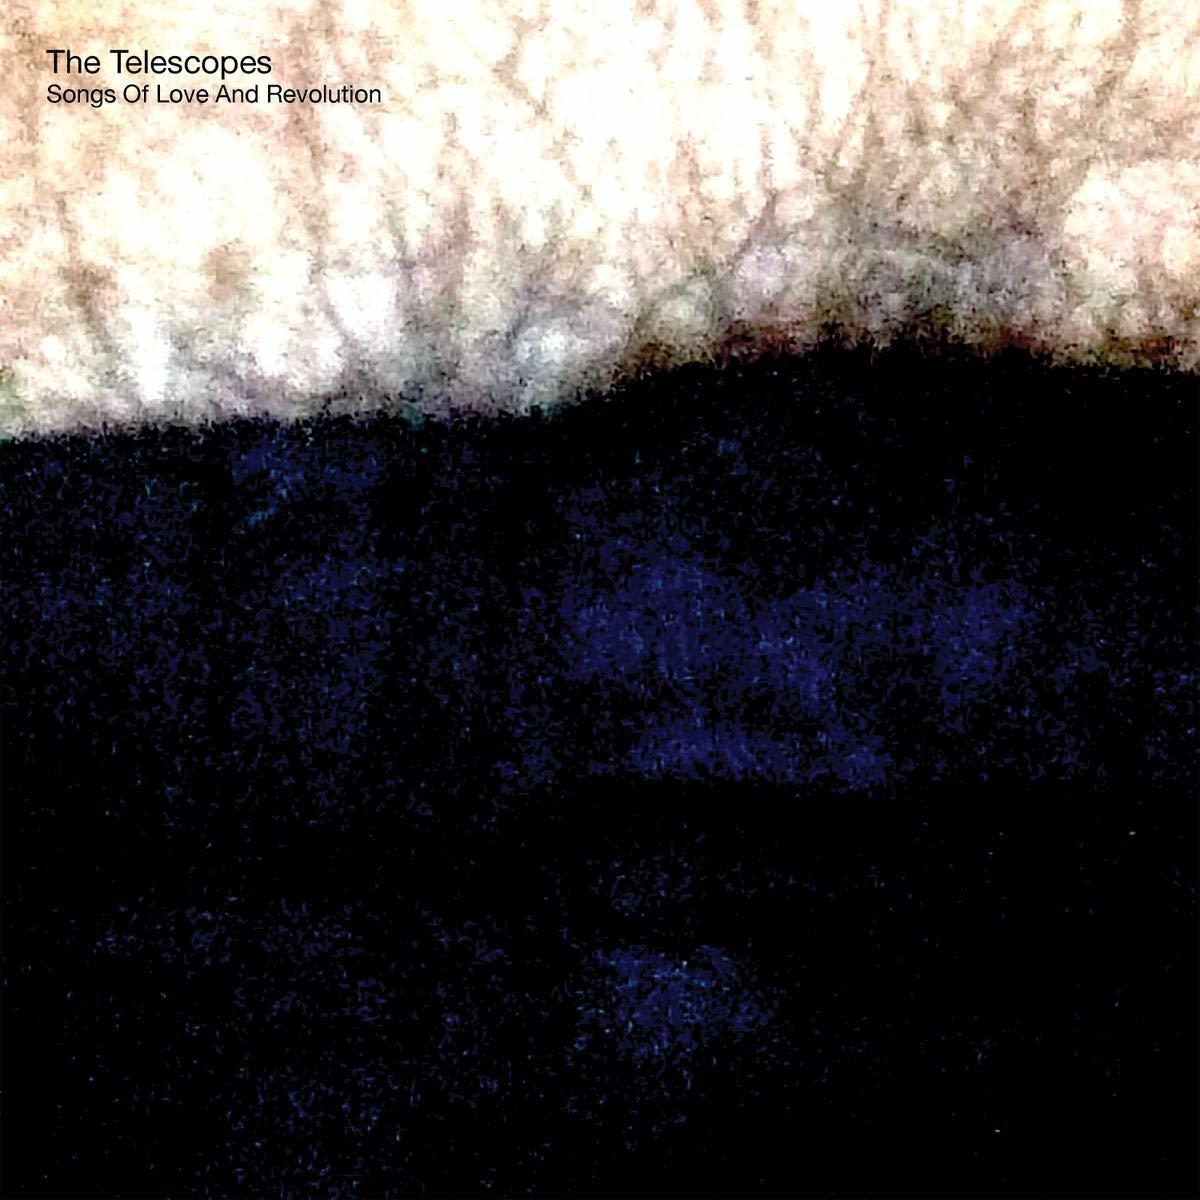 The Telescopes (CD) - - Revolution Songs And Of Love